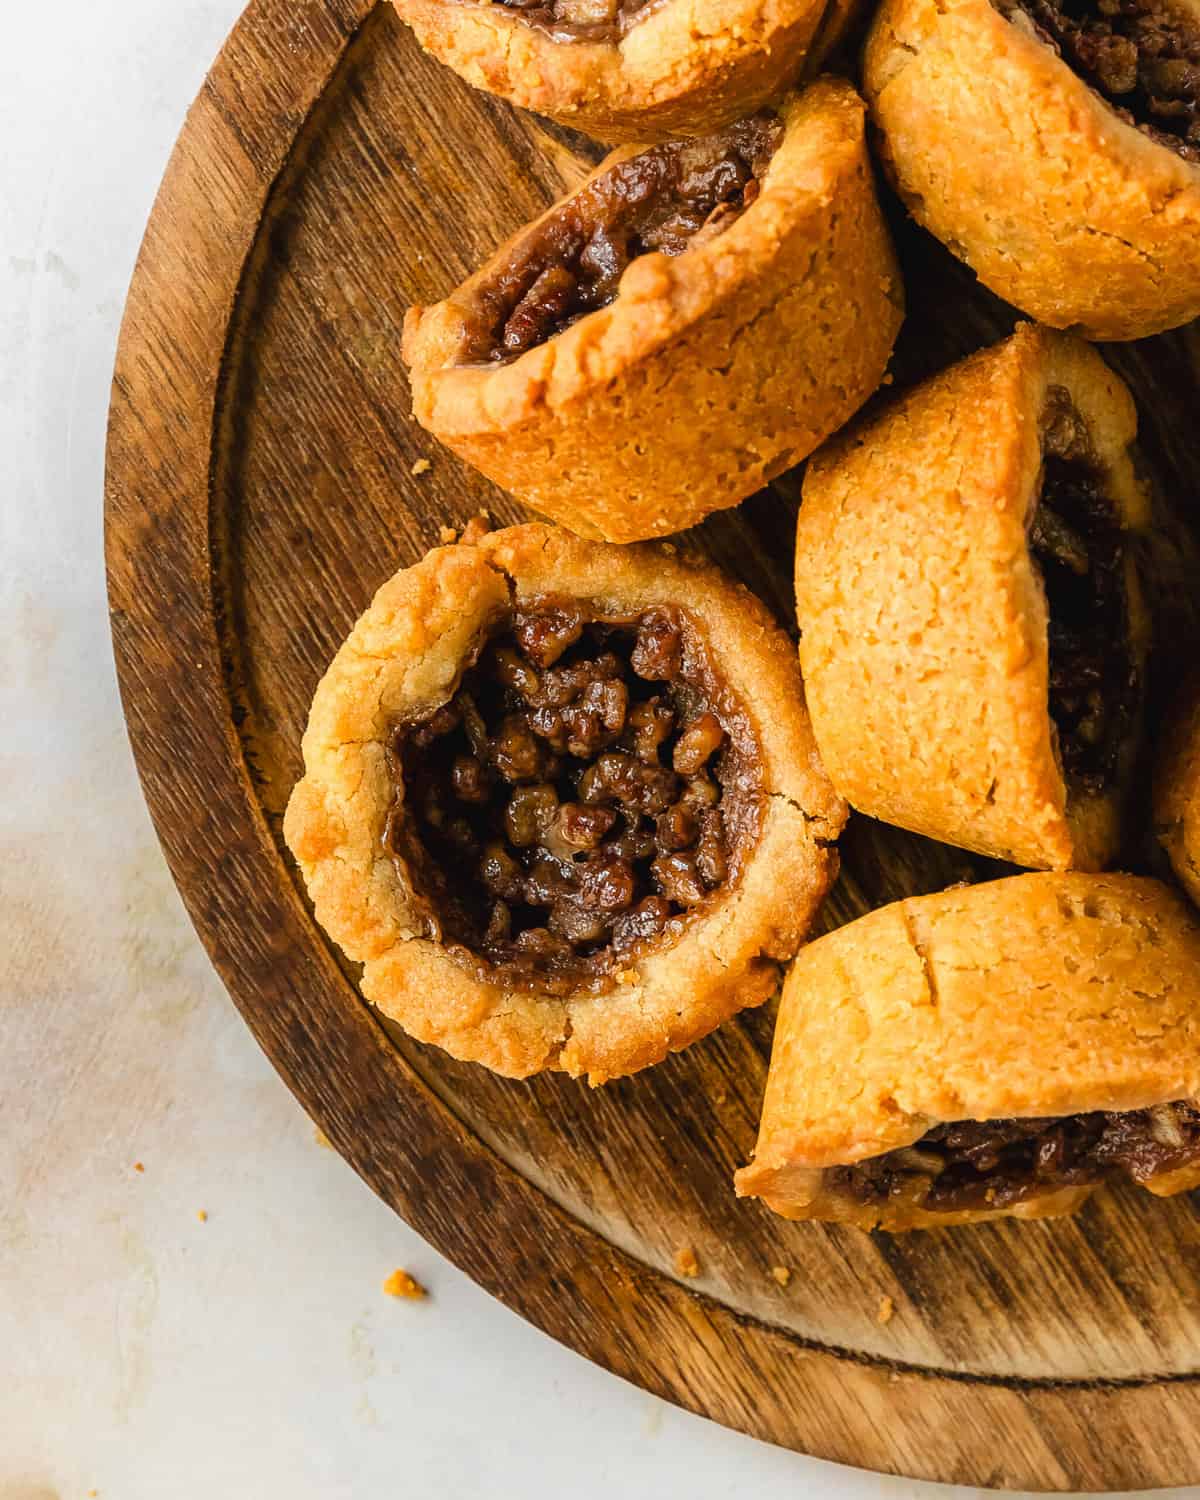  Pecan pie cookies are deliciously soft and buttery brown sugar cookie cups filled with a classic pecan pie filling.  This recipe for pecan pie cookies are easy to make, require no chilling time and are ready in about 30 minutes. These pecan cookies are a fun twist on the classic pecan pie dessert everyone will love. 